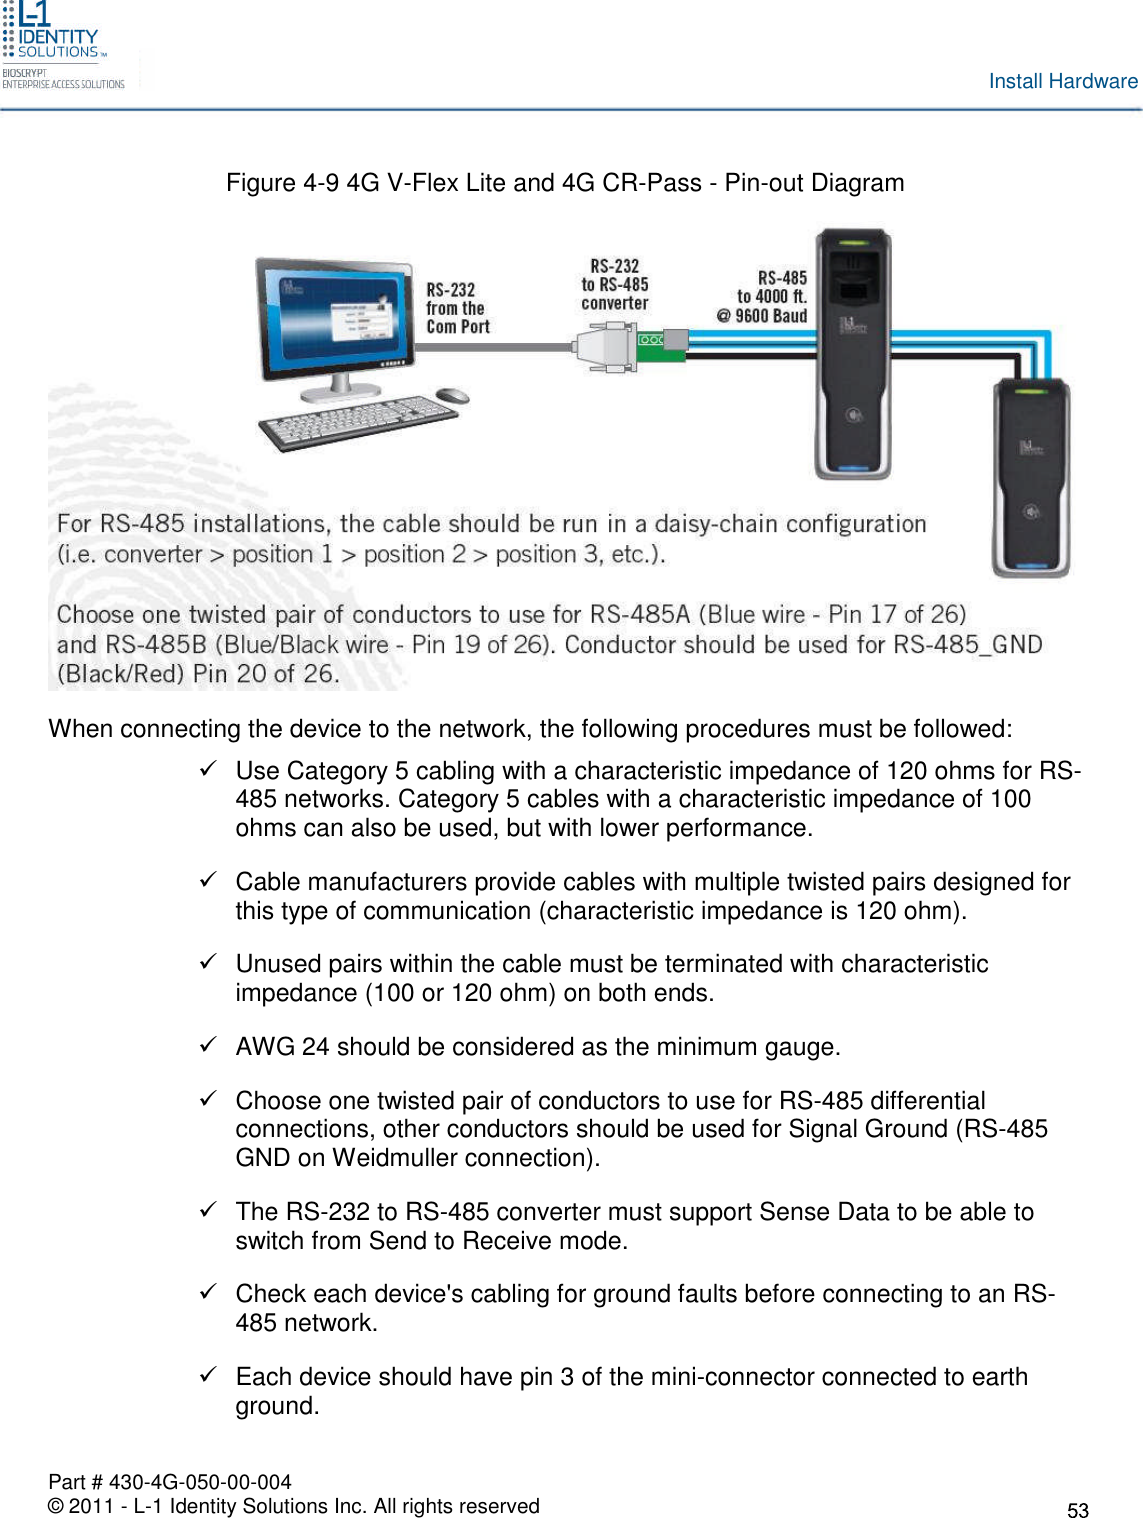 Part # 430-4G-050-00-004© 2011 - L-1 Identity Solutions Inc. All rights reservedInstall HardwareFigure 4-9 4G V-Flex Lite and 4G CR-Pass - Pin-out DiagramWhen connecting the device to the network, the following procedures must be followed:Use Category 5 cabling with a characteristic impedance of 120 ohms for RS-485 networks. Category 5 cables with a characteristic impedance of 100ohms can also be used, but with lower performance.Cable manufacturers provide cables with multiple twisted pairs designed forthis type of communication (characteristic impedance is 120 ohm).Unused pairs within the cable must be terminated with characteristicimpedance (100 or 120 ohm) on both ends.AWG 24 should be considered as the minimum gauge.Choose one twisted pair of conductors to use for RS-485 differentialconnections, other conductors should be used for Signal Ground (RS-485GND on Weidmuller connection).The RS-232 to RS-485 converter must support Sense Data to be able toswitch from Send to Receive mode.Check each device&apos;s cabling for ground faults before connecting to an RS-485 network.Each device should have pin 3 of the mini-connector connected to earthground.